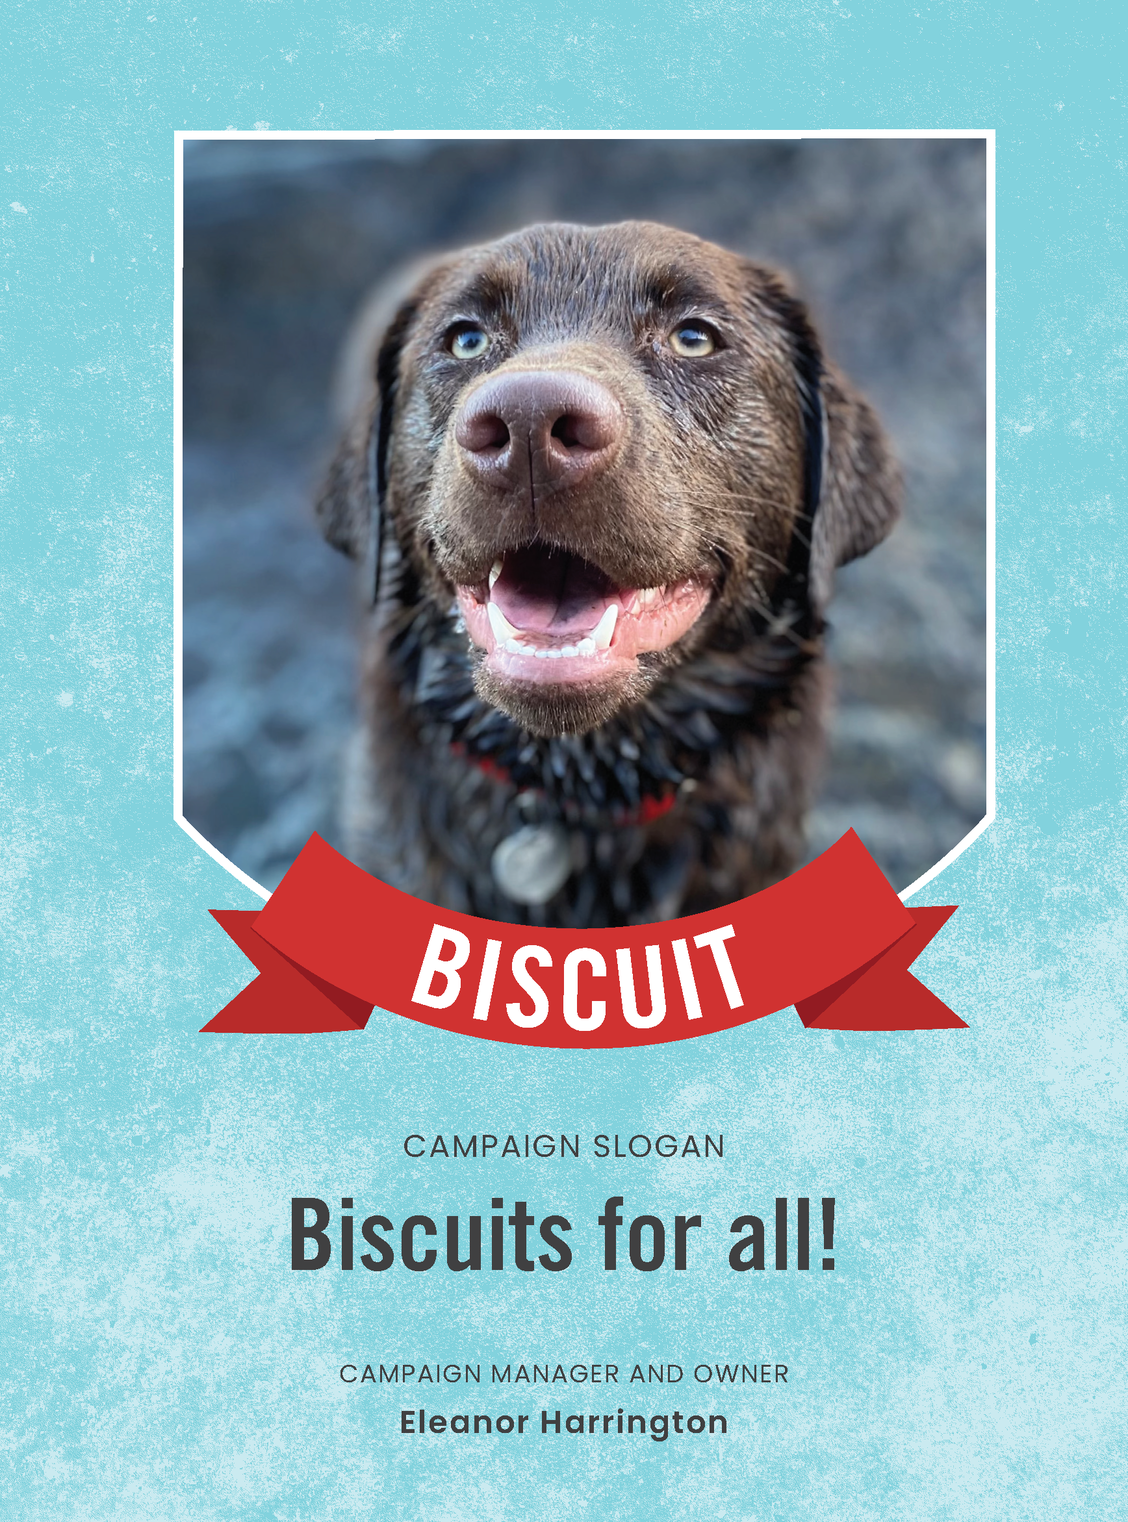 Vote for Biscuit!